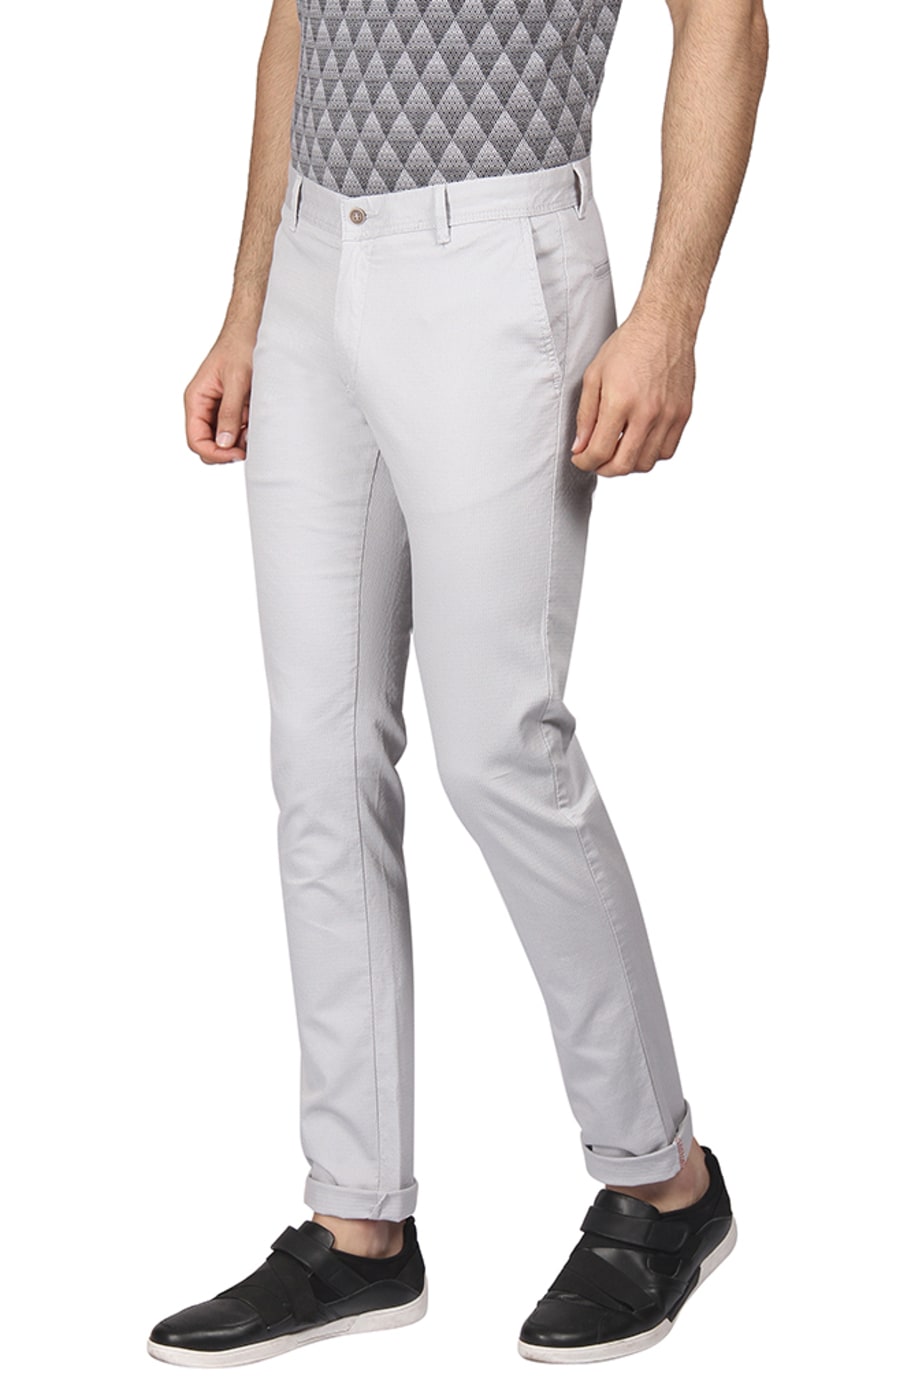 Blackberrys formal pants for men are about neat designs and durability  HT  Shop Now